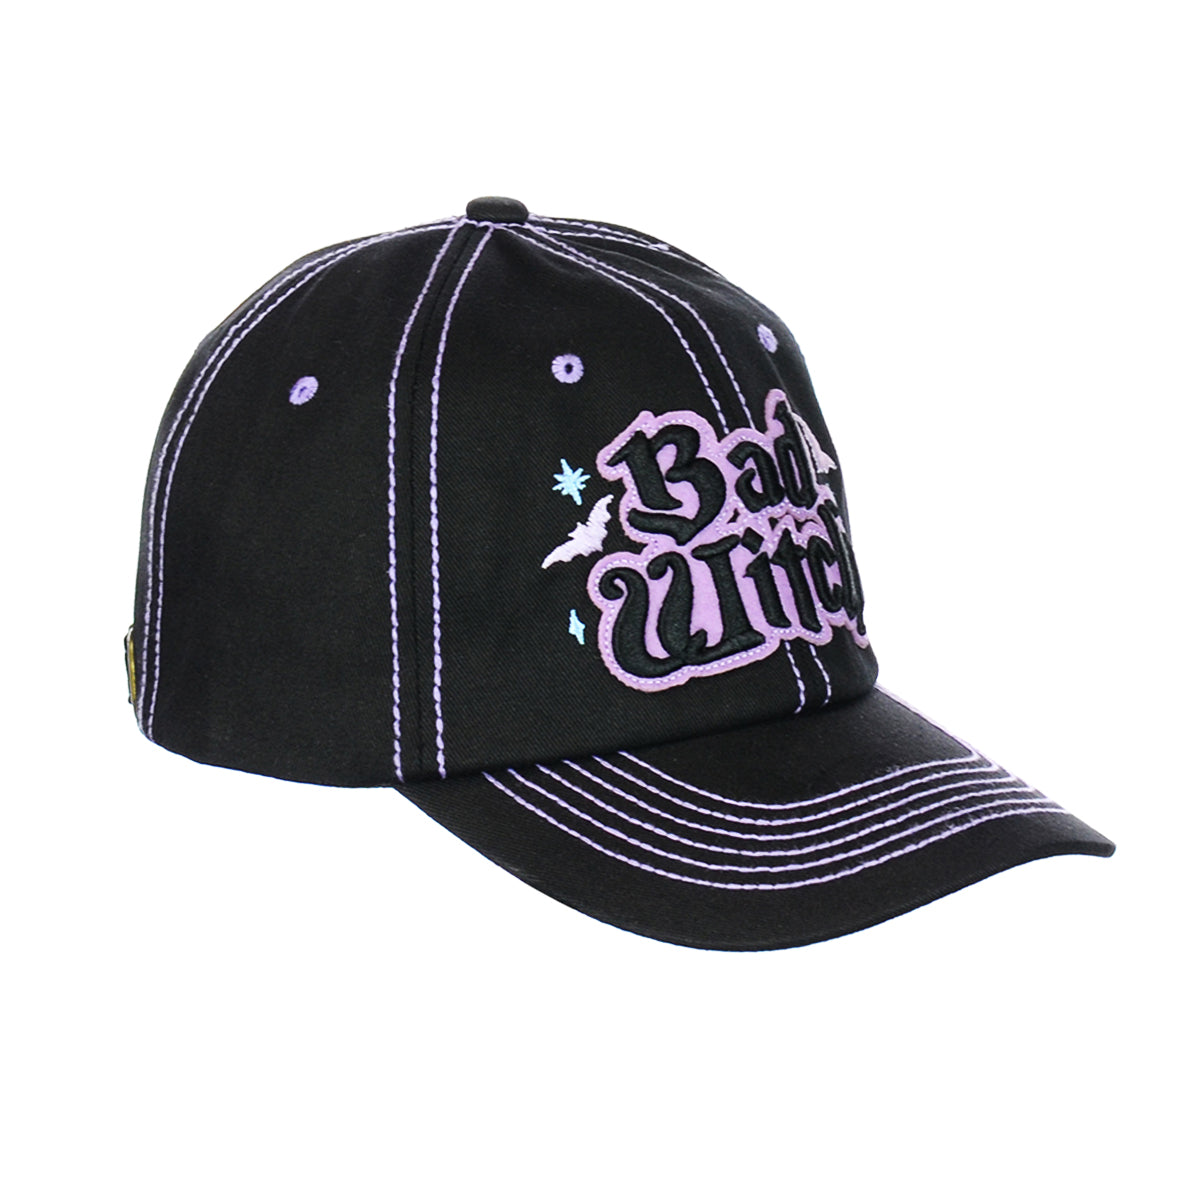 Snapback "BAD WITCH" Hat Embroidered